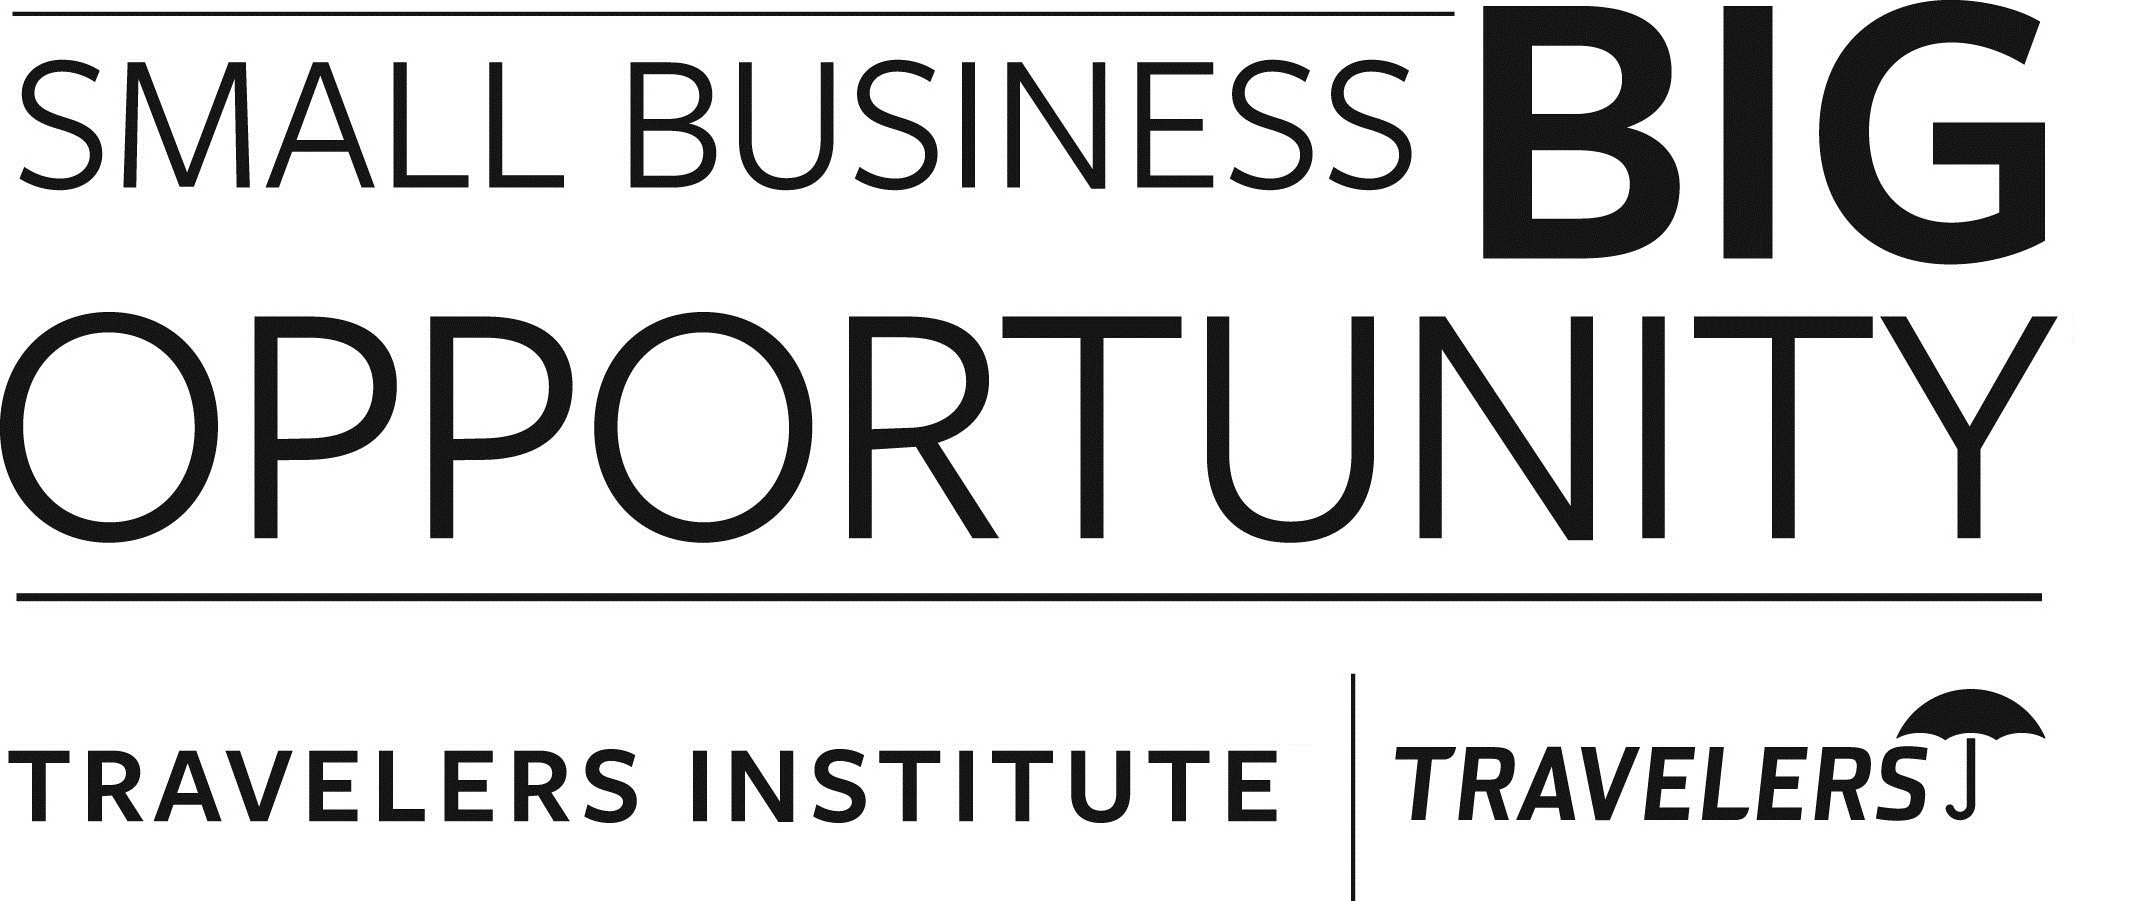 Trademark Logo SMALL BUSINESS BIG OPPORTUNITY TRAVELERS INSTITUTE TRAVELERS